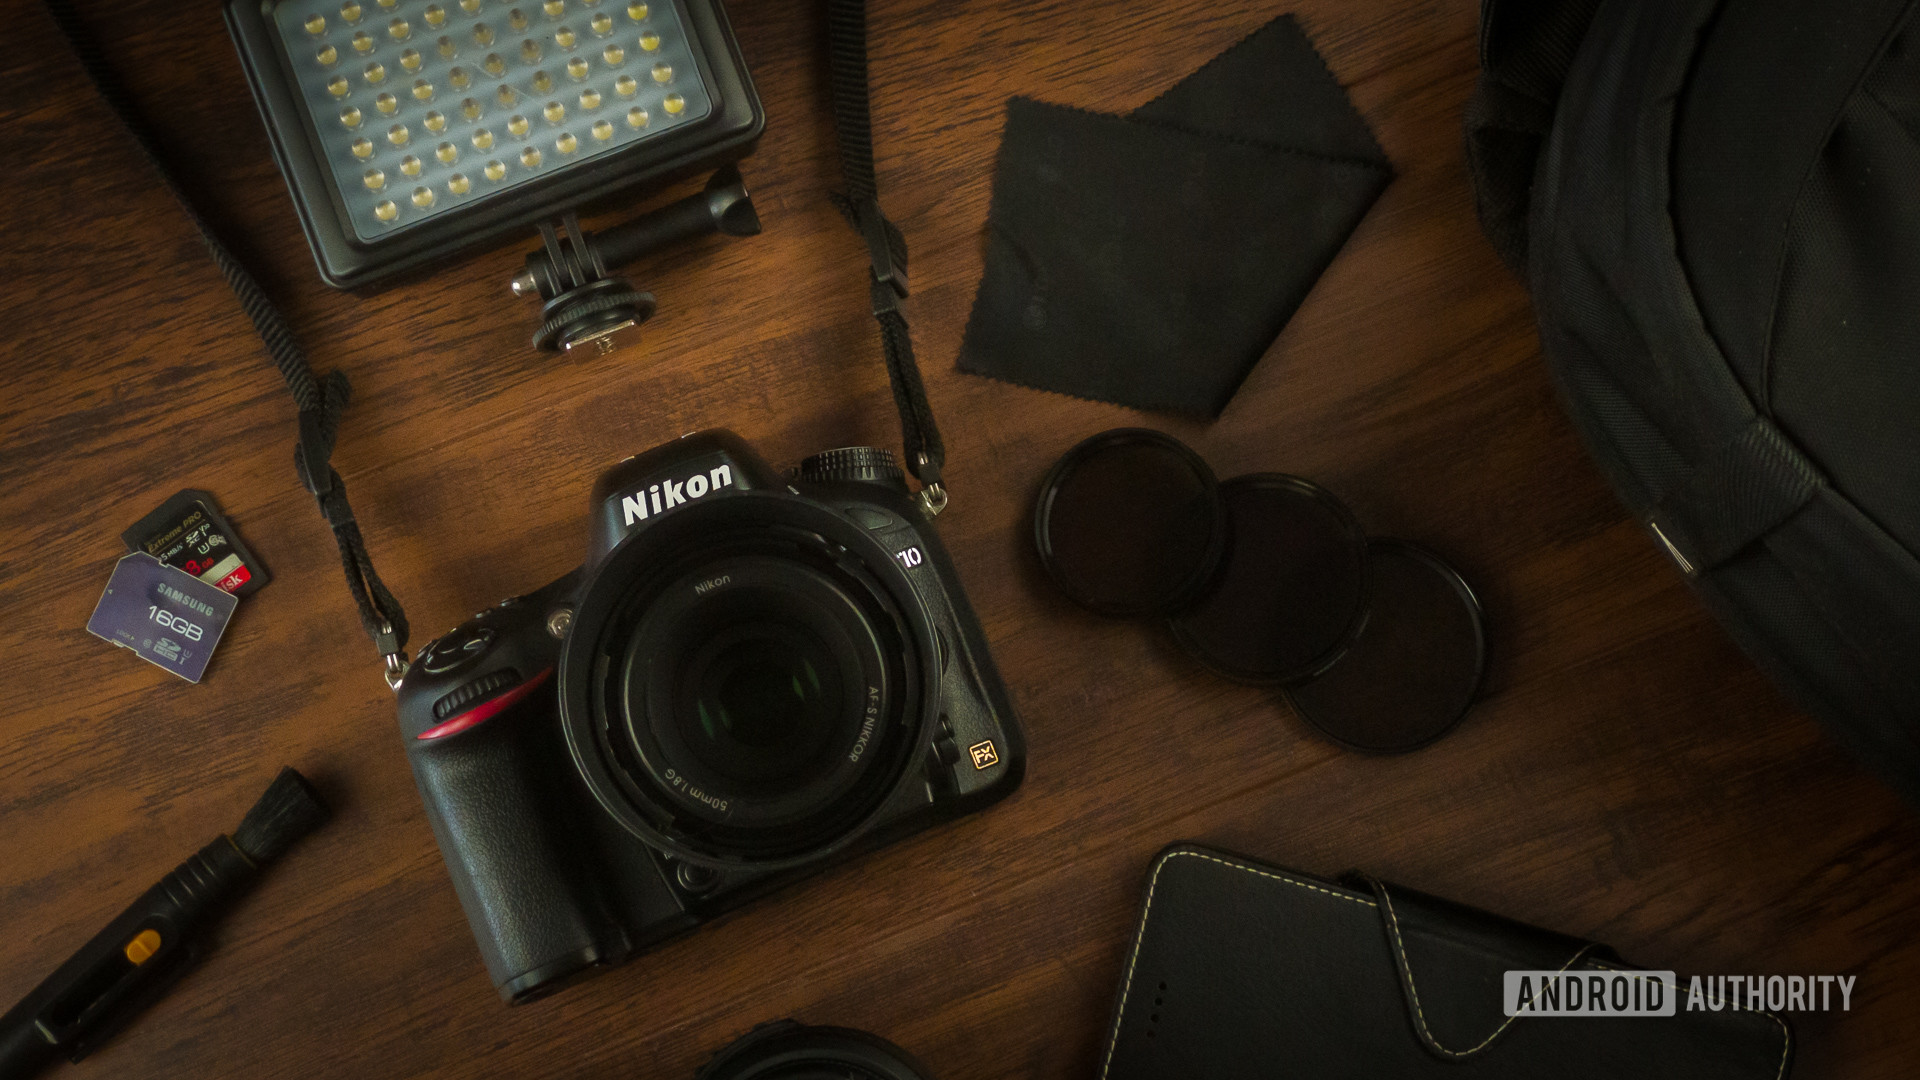 Nikon photography gear including camera, bag, microfiber pen, LED smartphone, SD cards, polarizers, ND filters. 